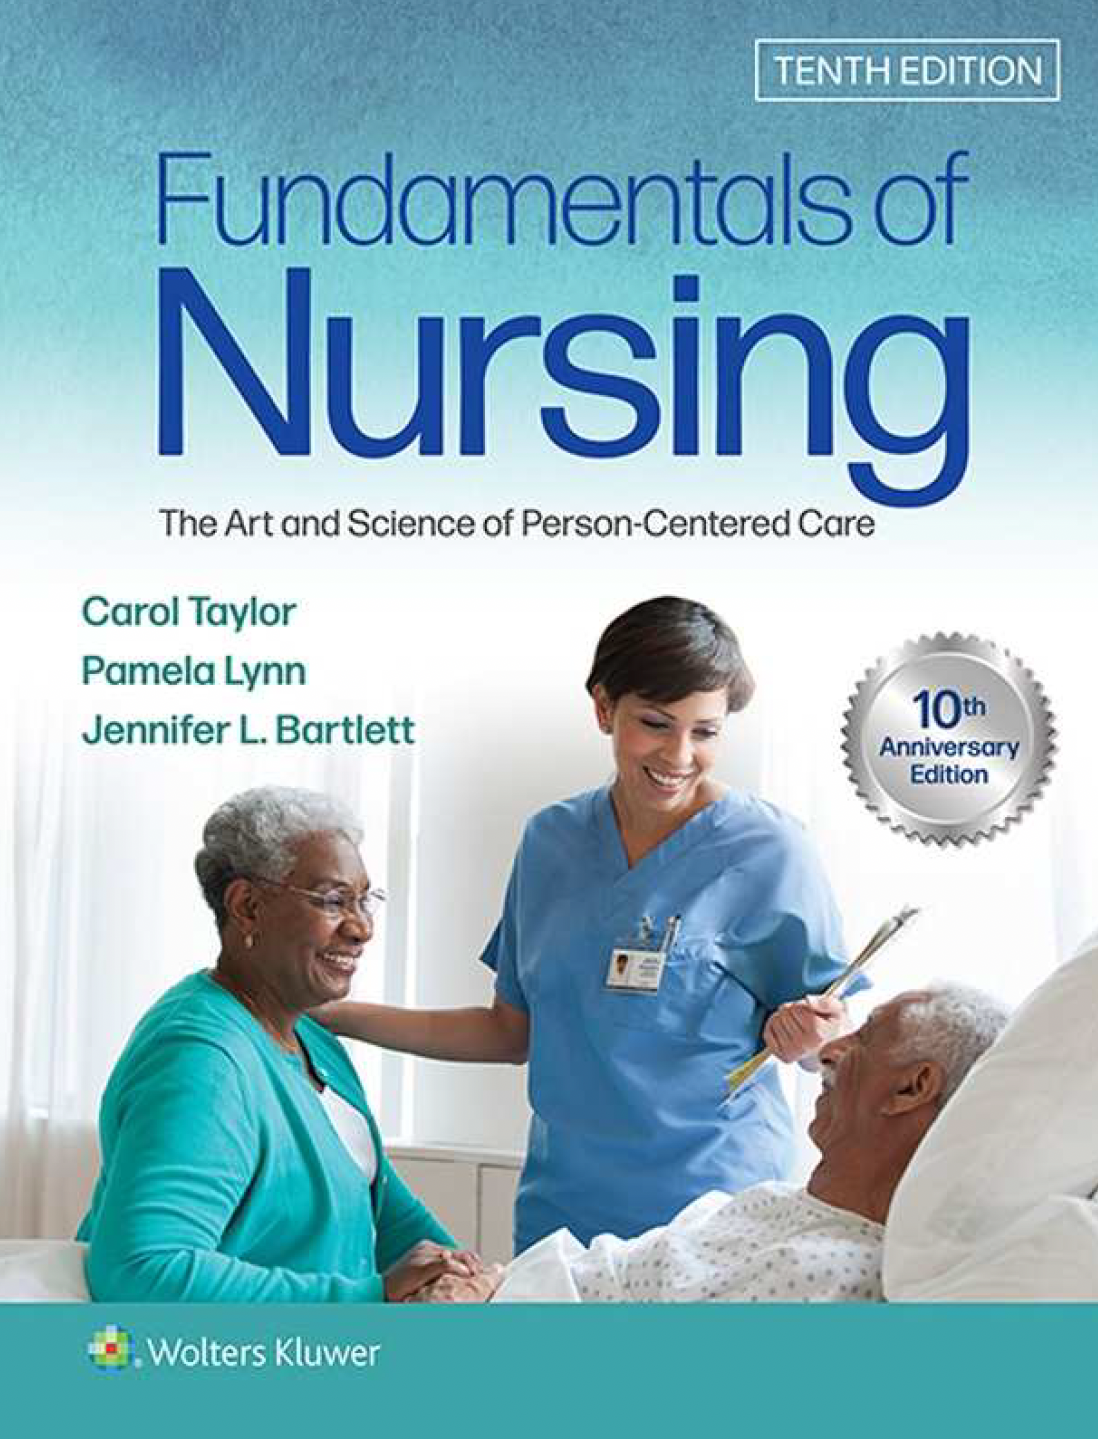 Fundamentals of Nursing: The Art and Science of Person-Centered Care 10TH Edition